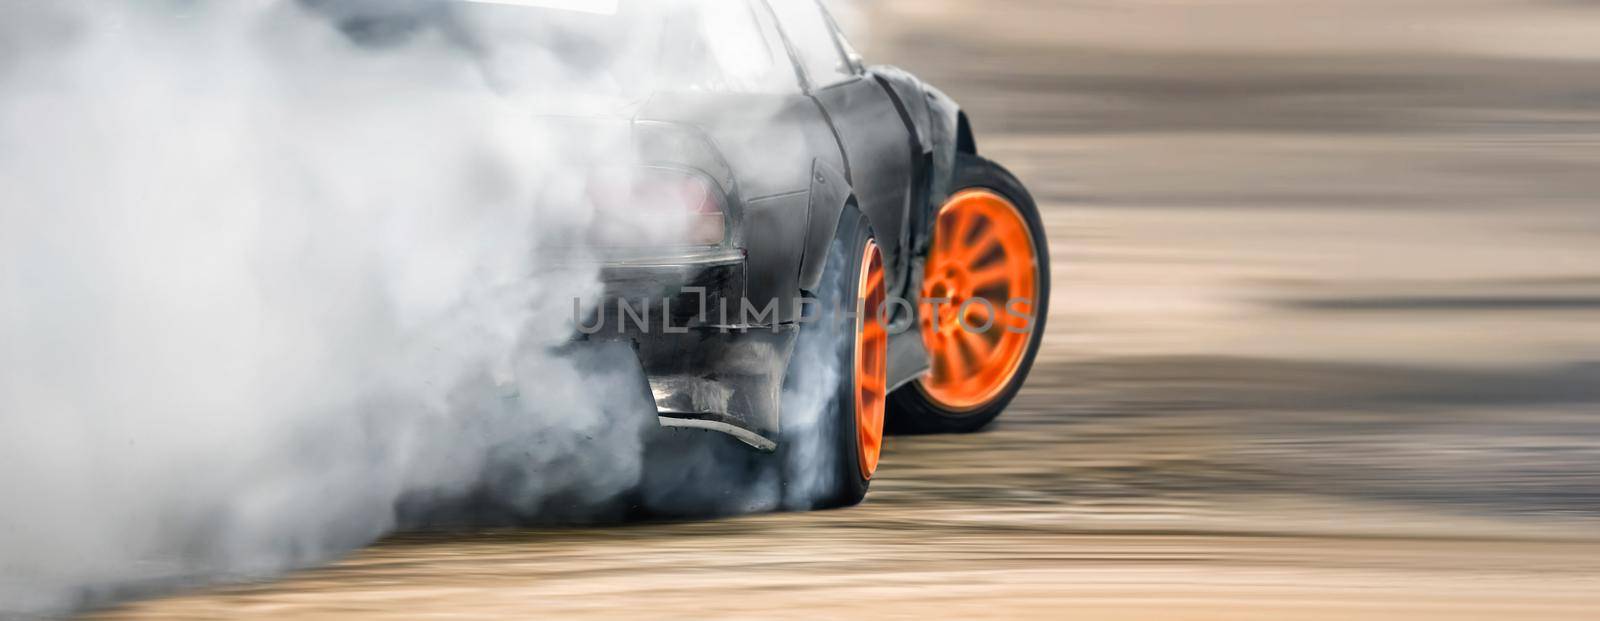 Race drift car burning tires on speed track by toa55